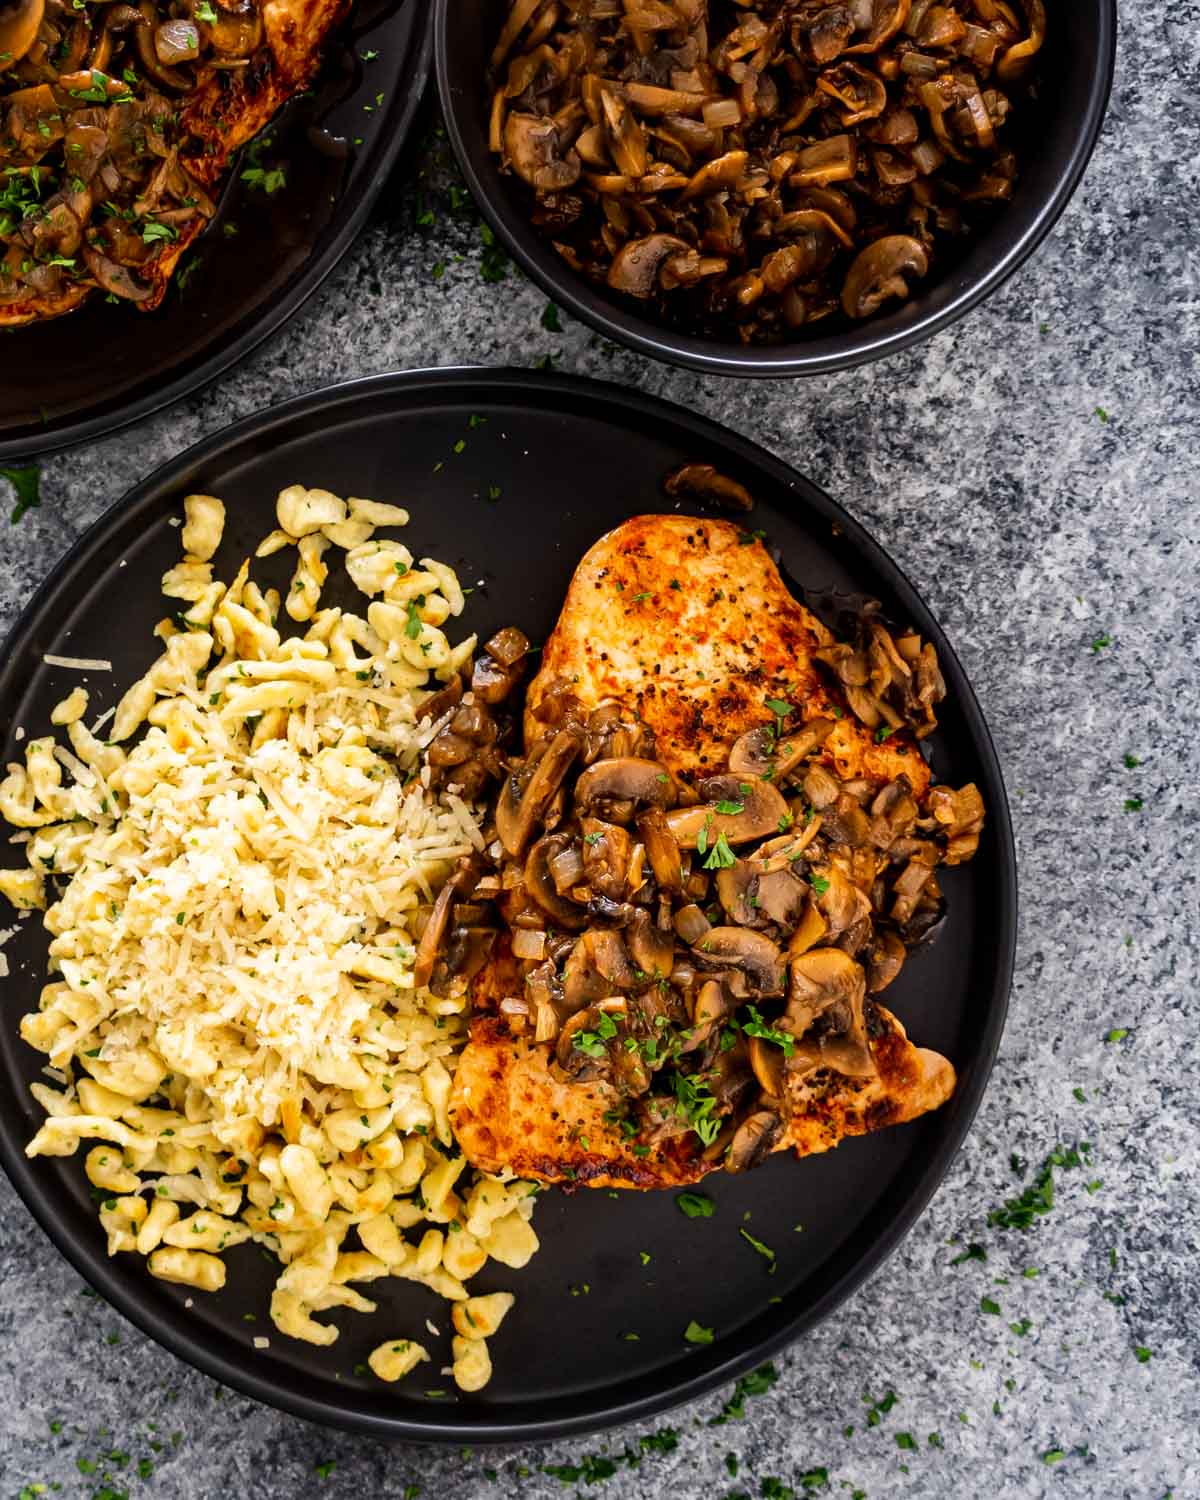 jagerschnitzel with spaetzle on a black plate garnished with parsley.